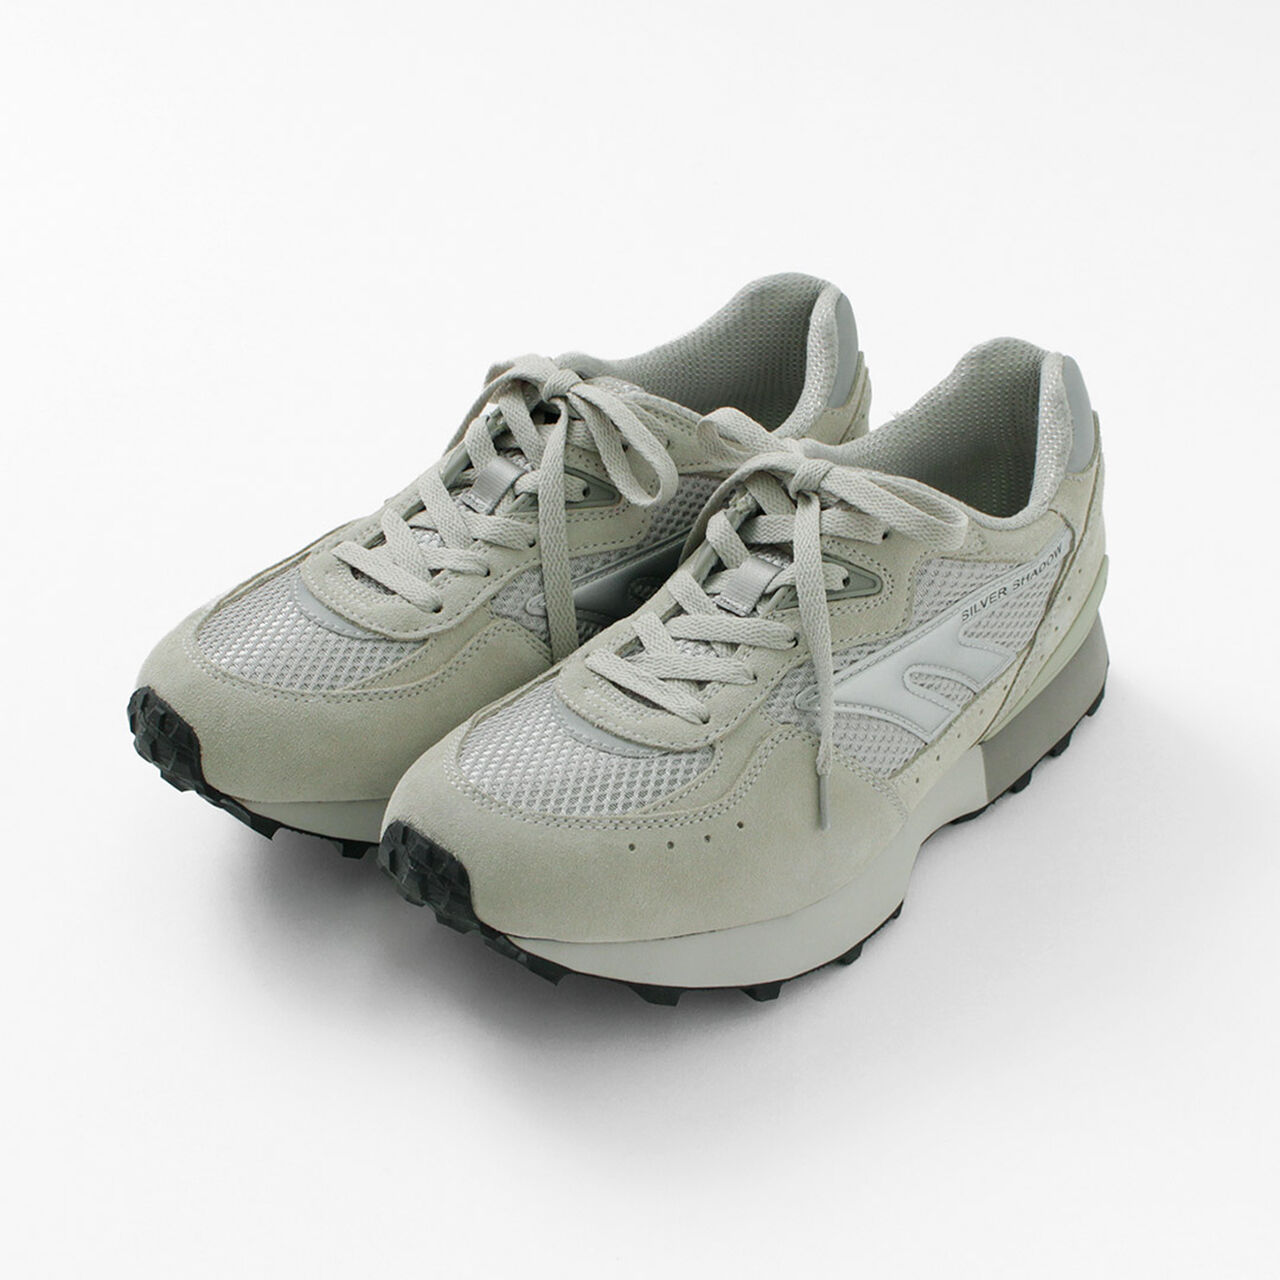 Silver Shadow 2 Sneakers,Silver, large image number 0